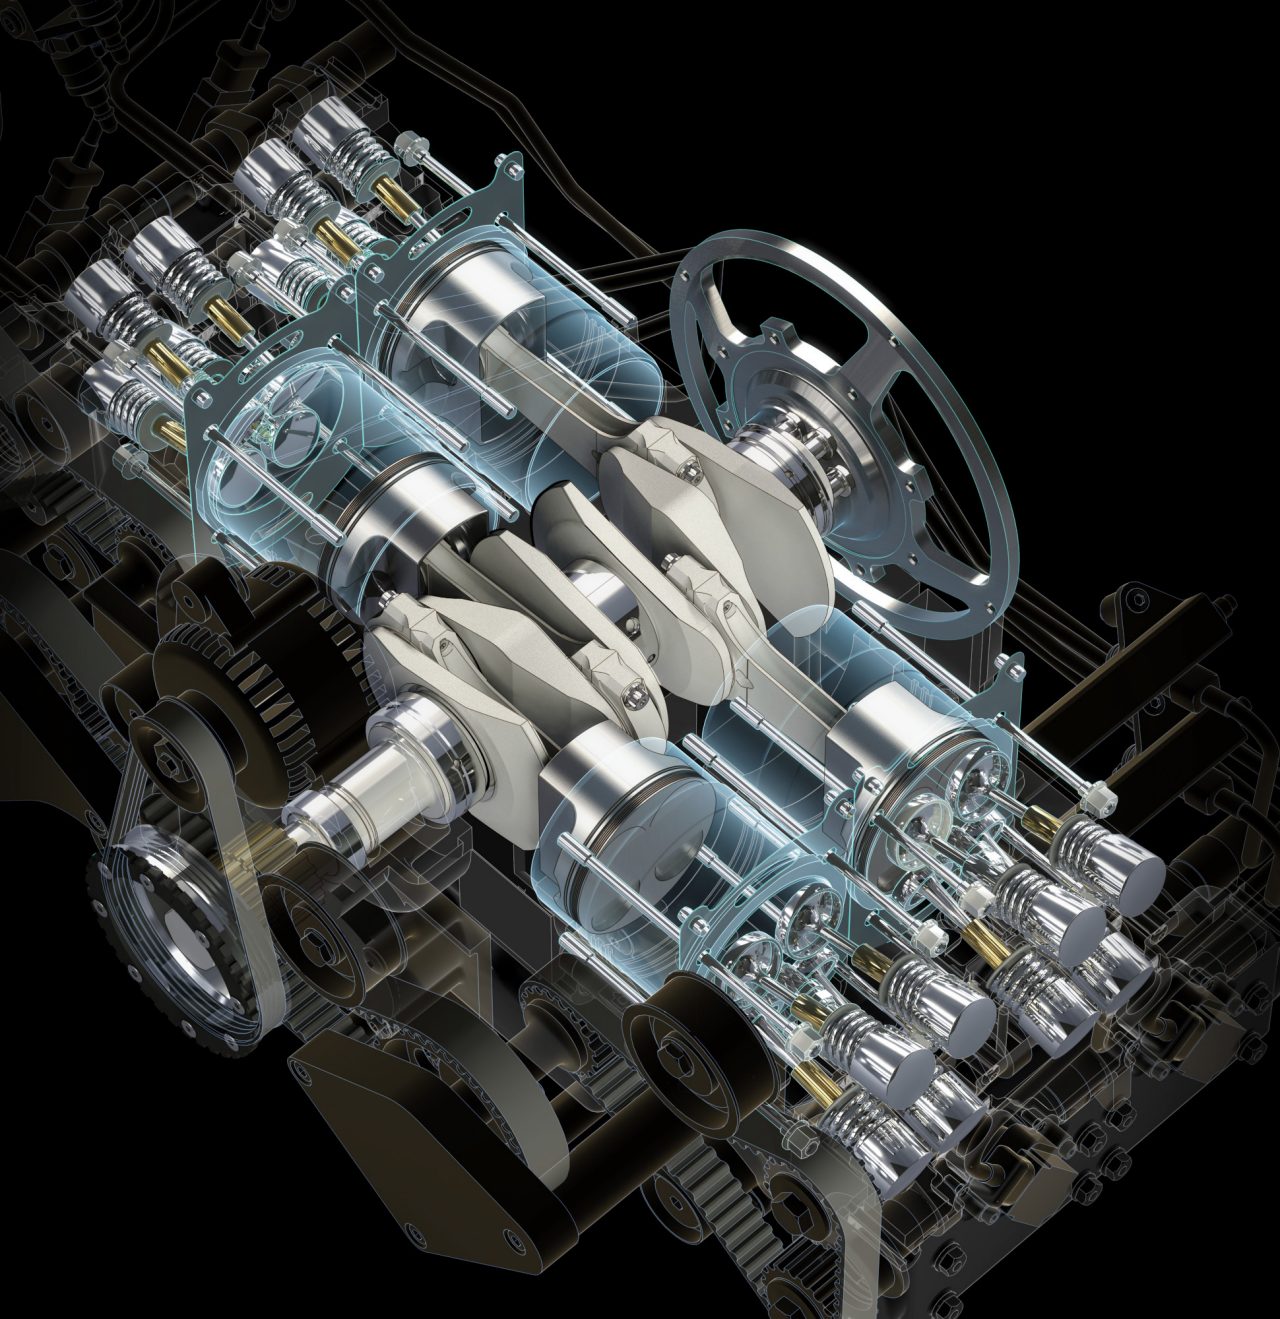 3D rendering of an engine. Image shows a cutaway view of an engine with selected components made transparent to reveal the interrelation of components. Model designed with Inventor and image rendered using 3ds Max.